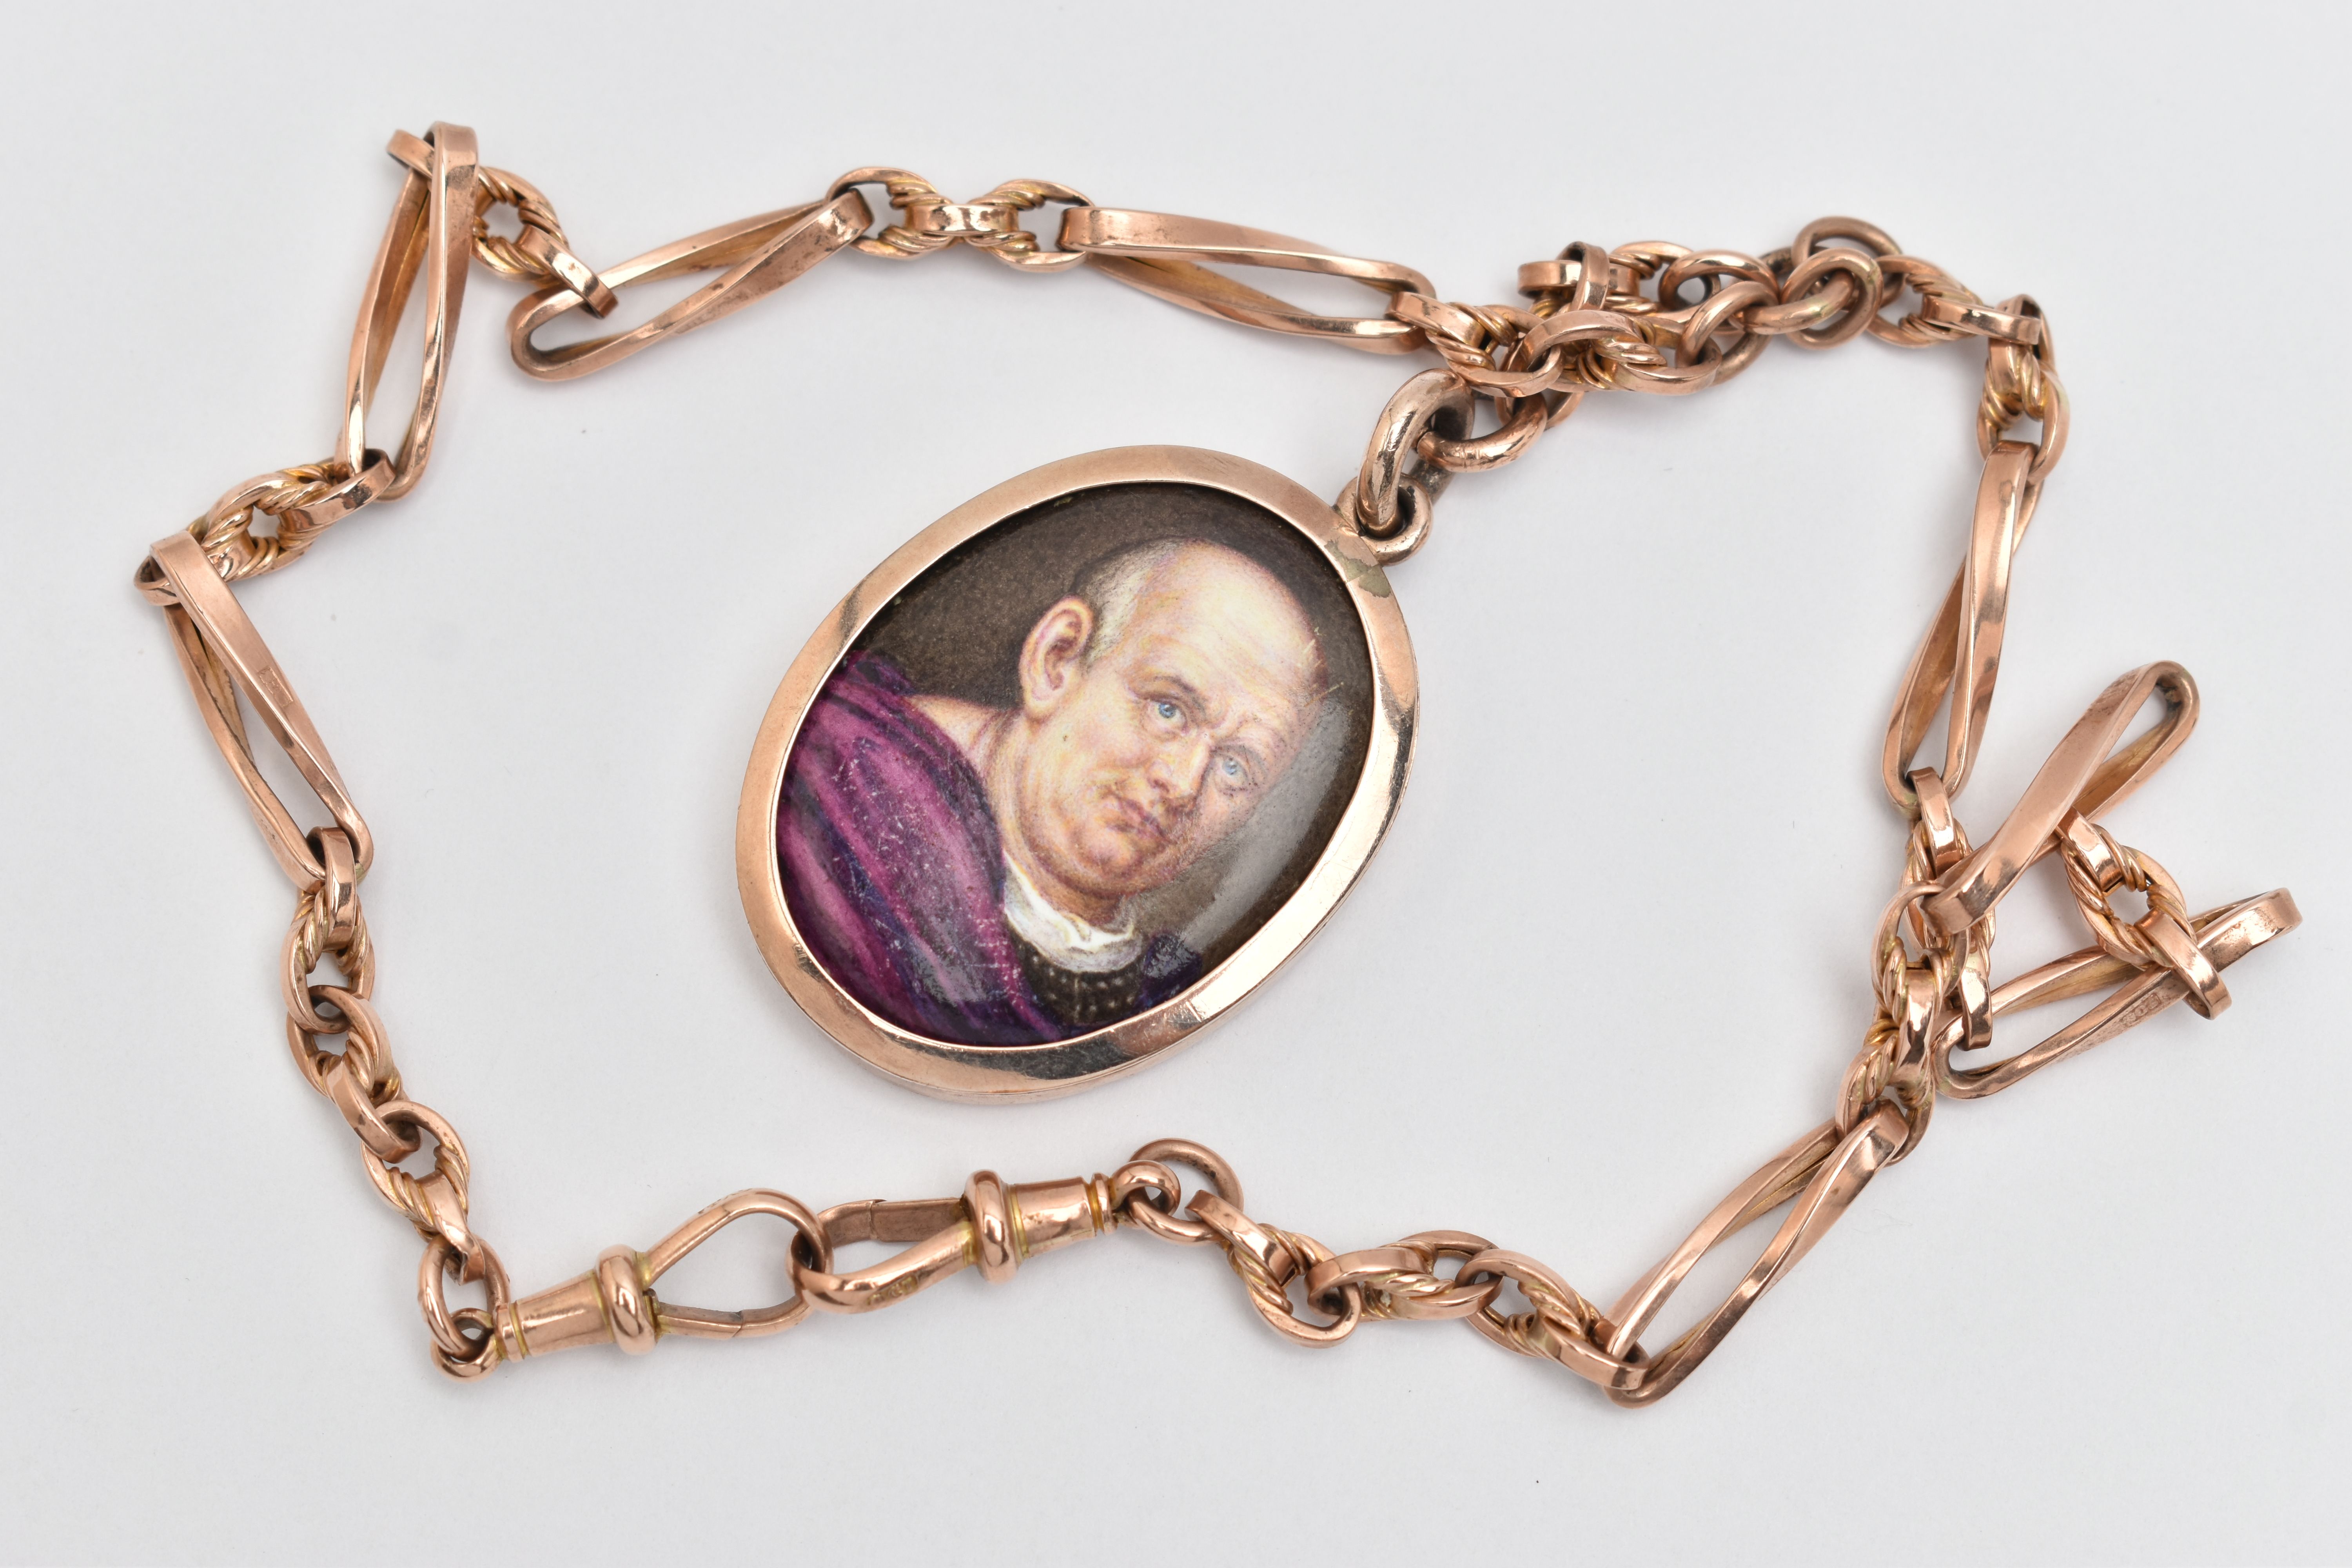 AN EARLY 20TH CENTURY MINIATURE PORTRAIT PENDANT AND CHAIN, the oval enamel pendant depicting a - Image 7 of 7